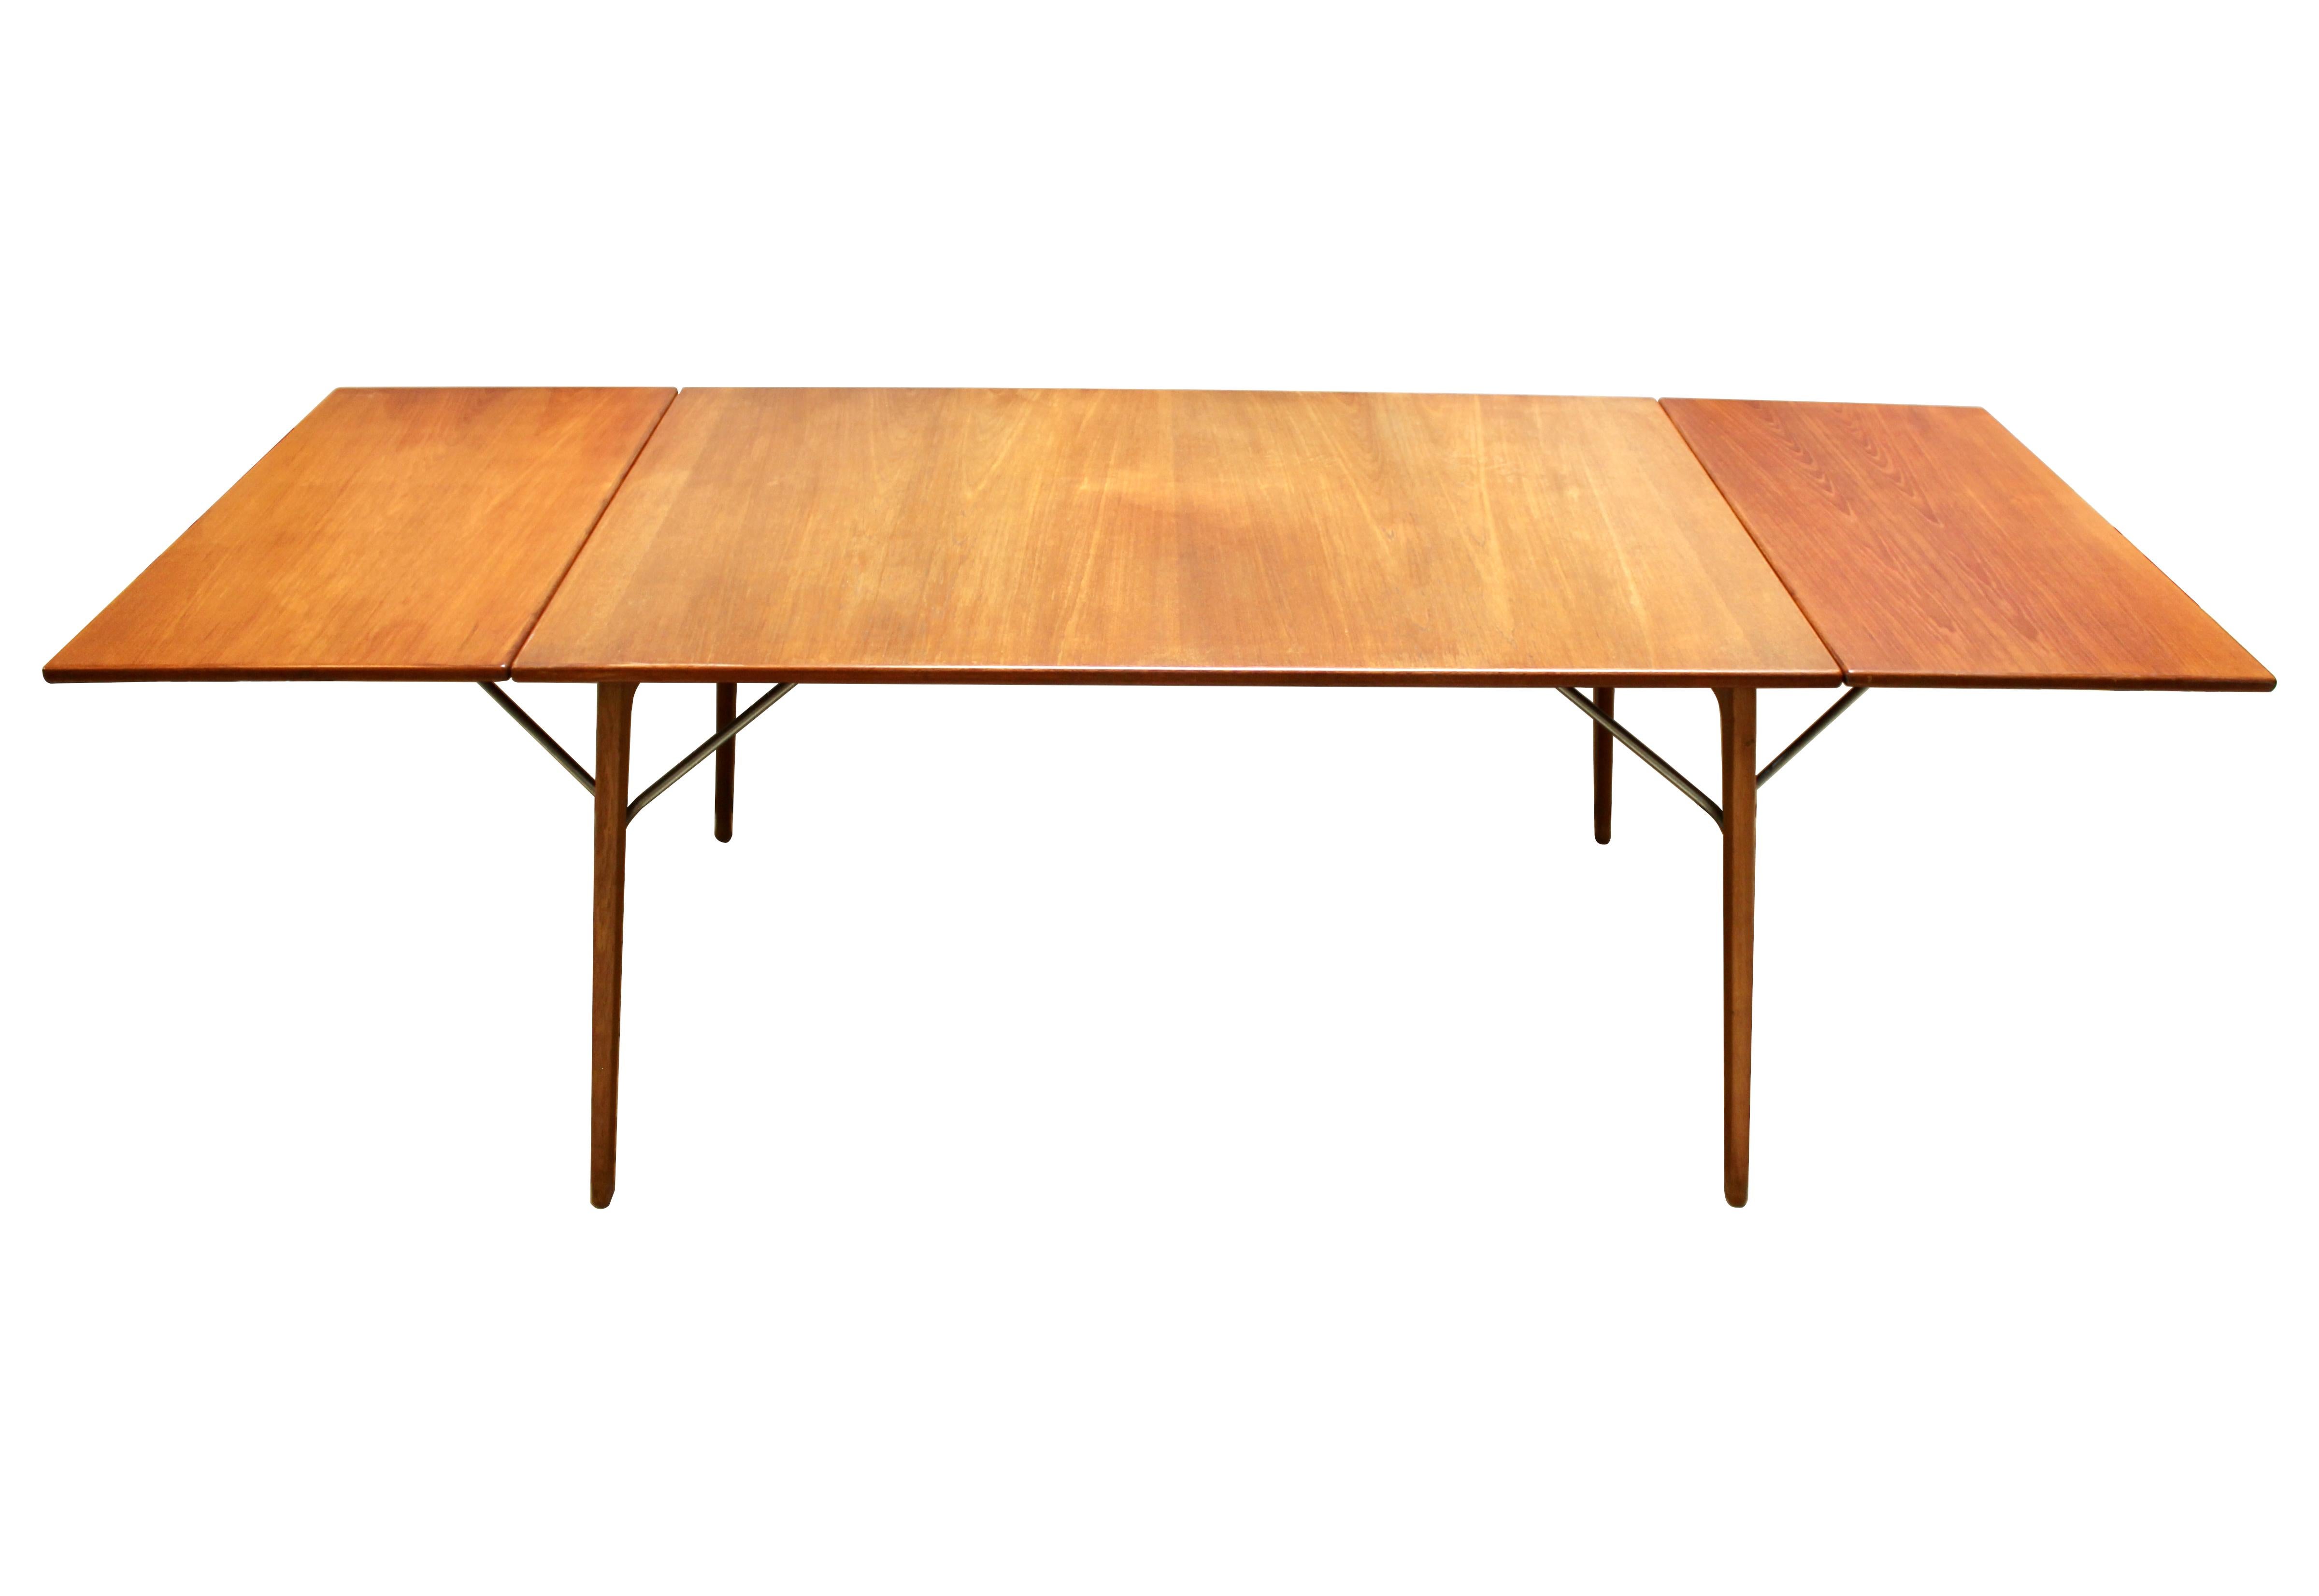 Danish Modern Børge Mogensen model 162 teak dining table for Søborg Møbelfabrik, circa 1953. The table has two removable drop leaves; each leaf adds 19.5” and the table measures 94” wide at full extension. In excellent condition.

Width: 55 in /